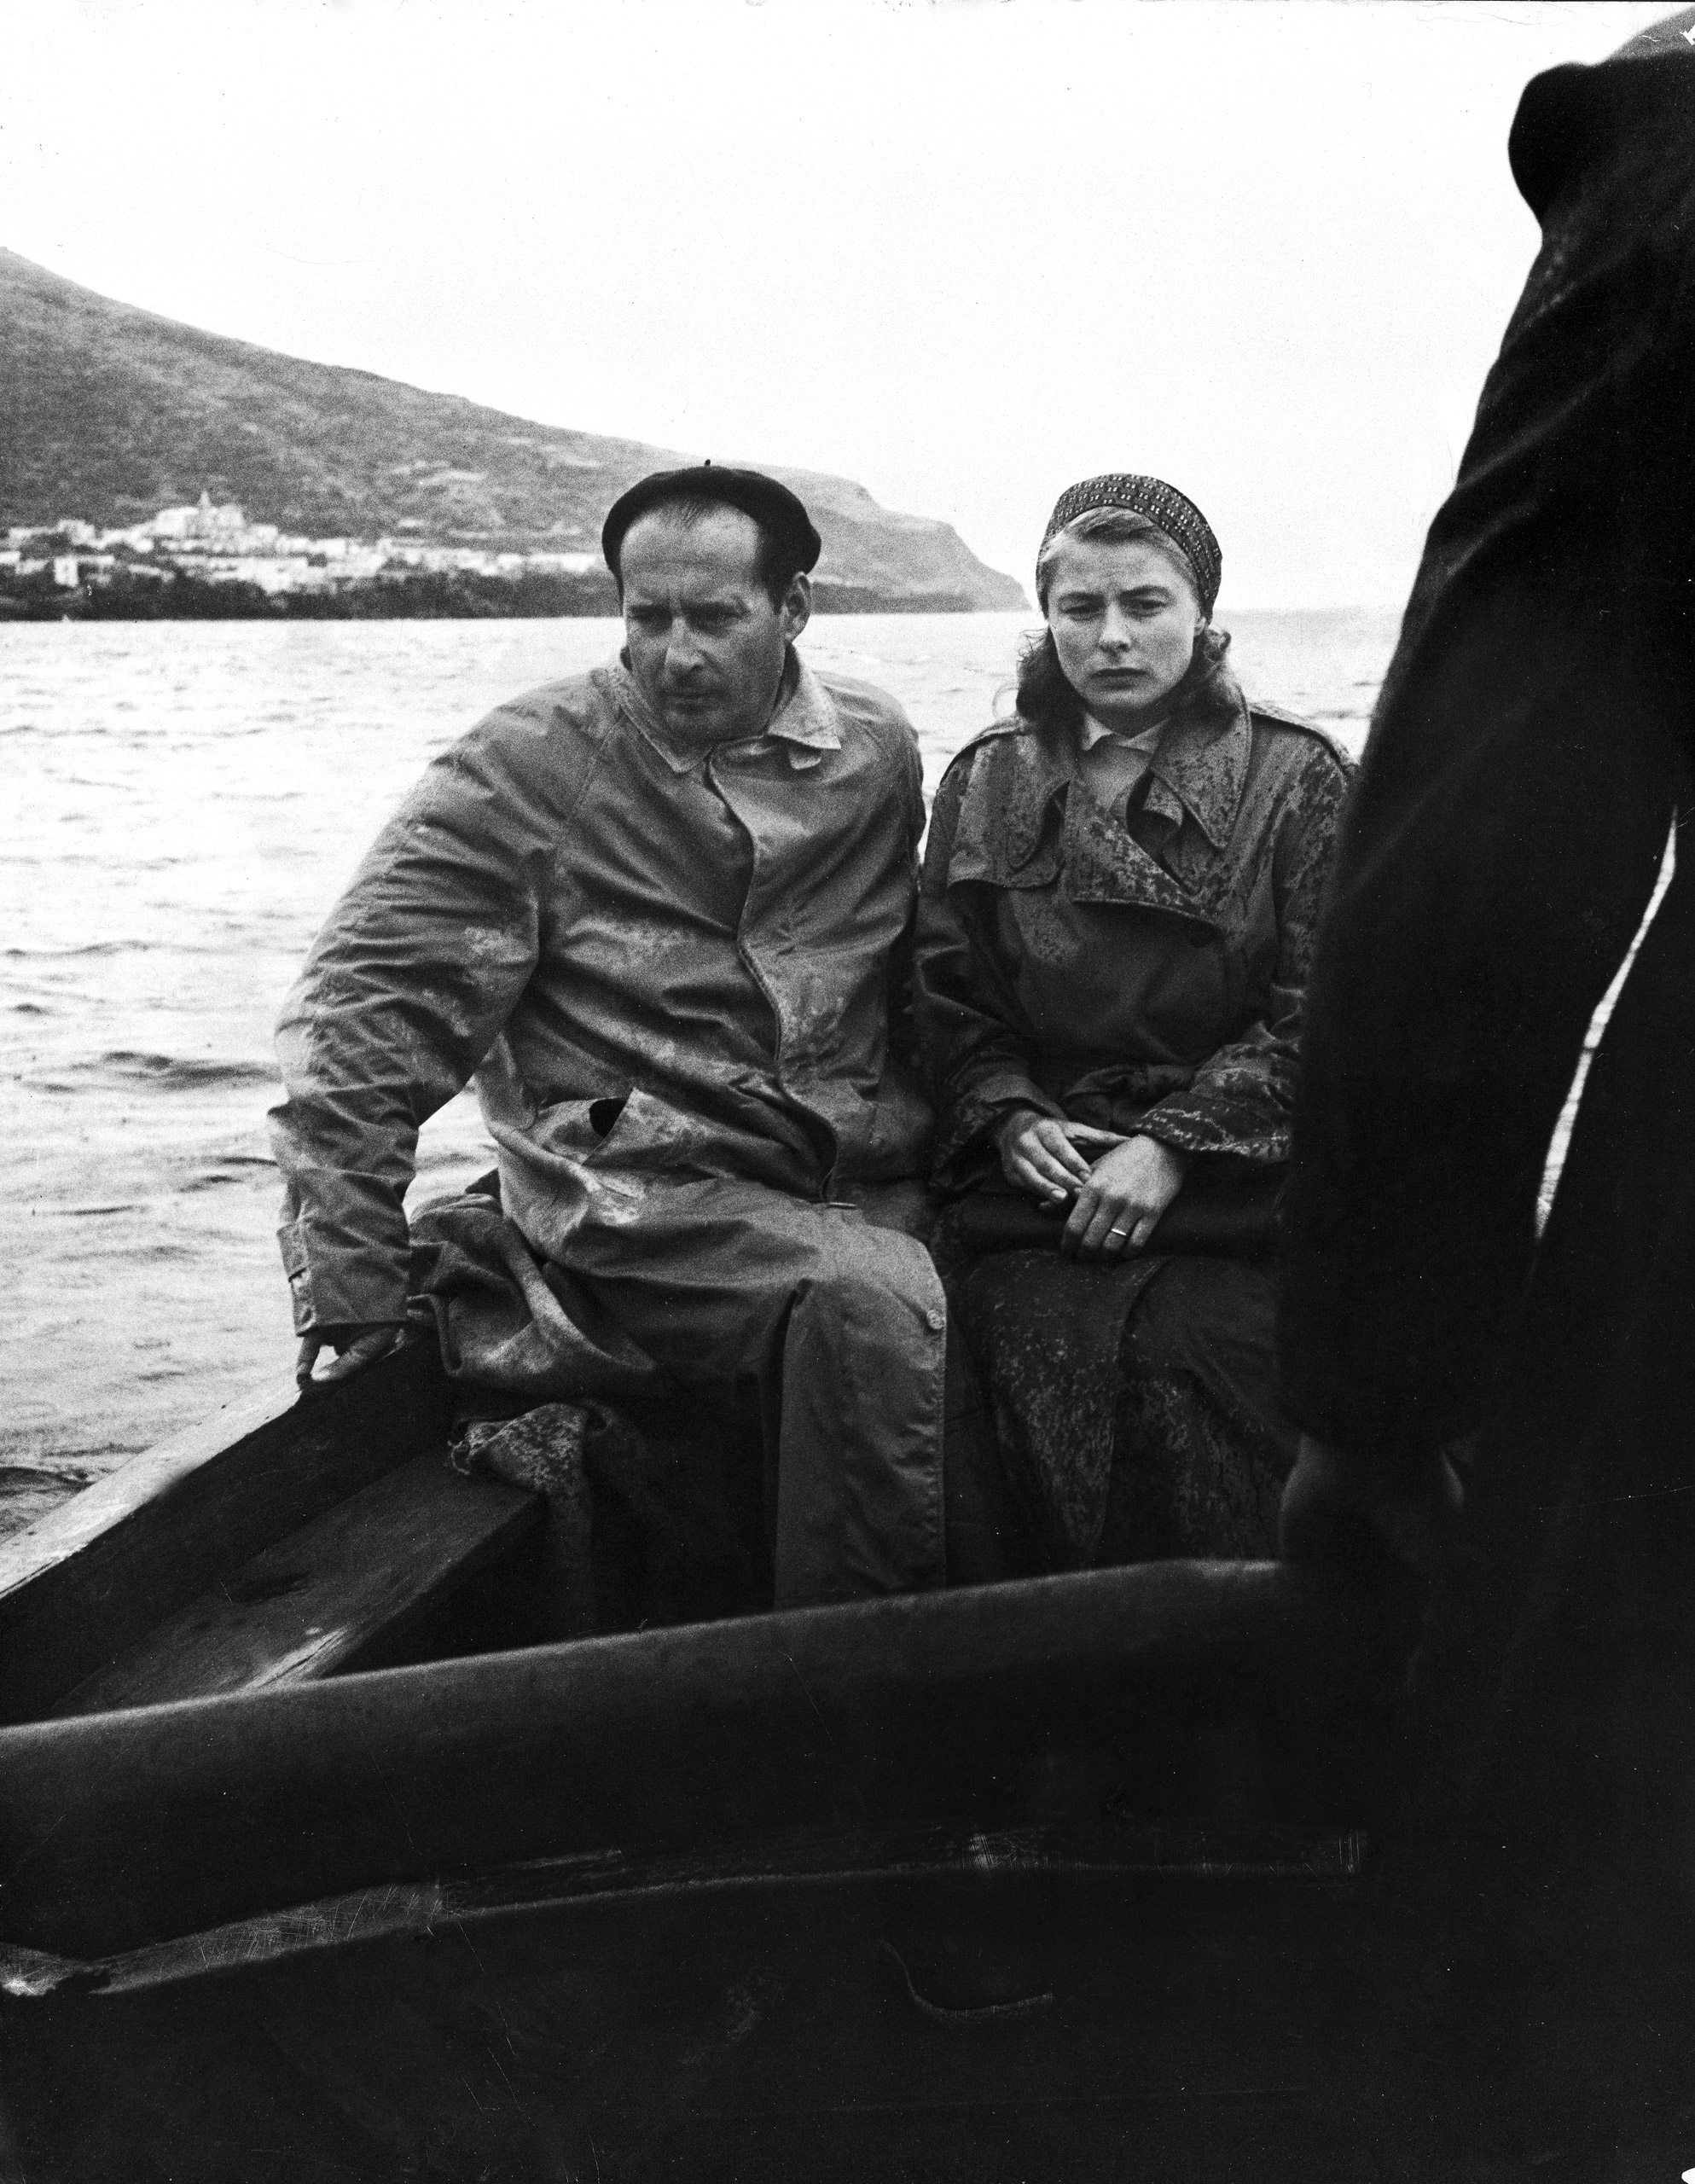 Ingrid Bergman with her lover, Roberto Rossellini, traveling in a boat from Stromboli Island to Messina to meet with her husband about getting a divorce.